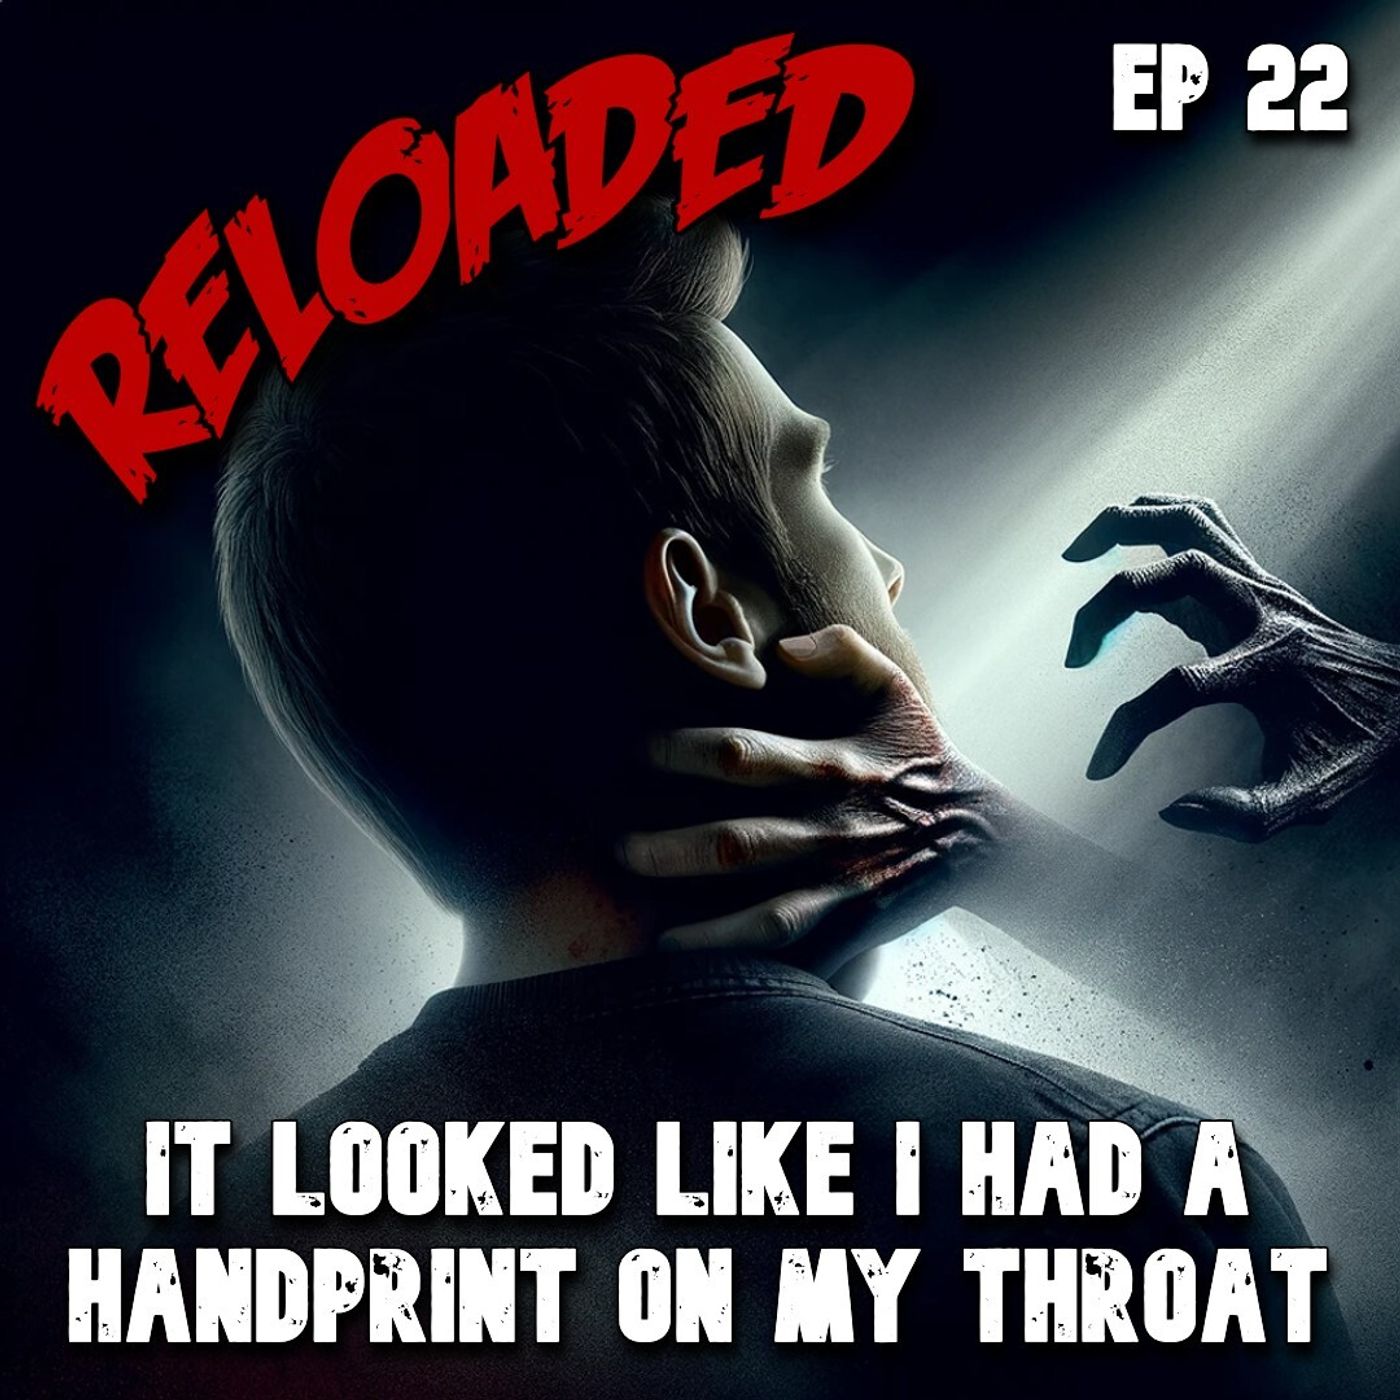 RELOADED | 22: It Looked Like I Had a Handprint On My Throat